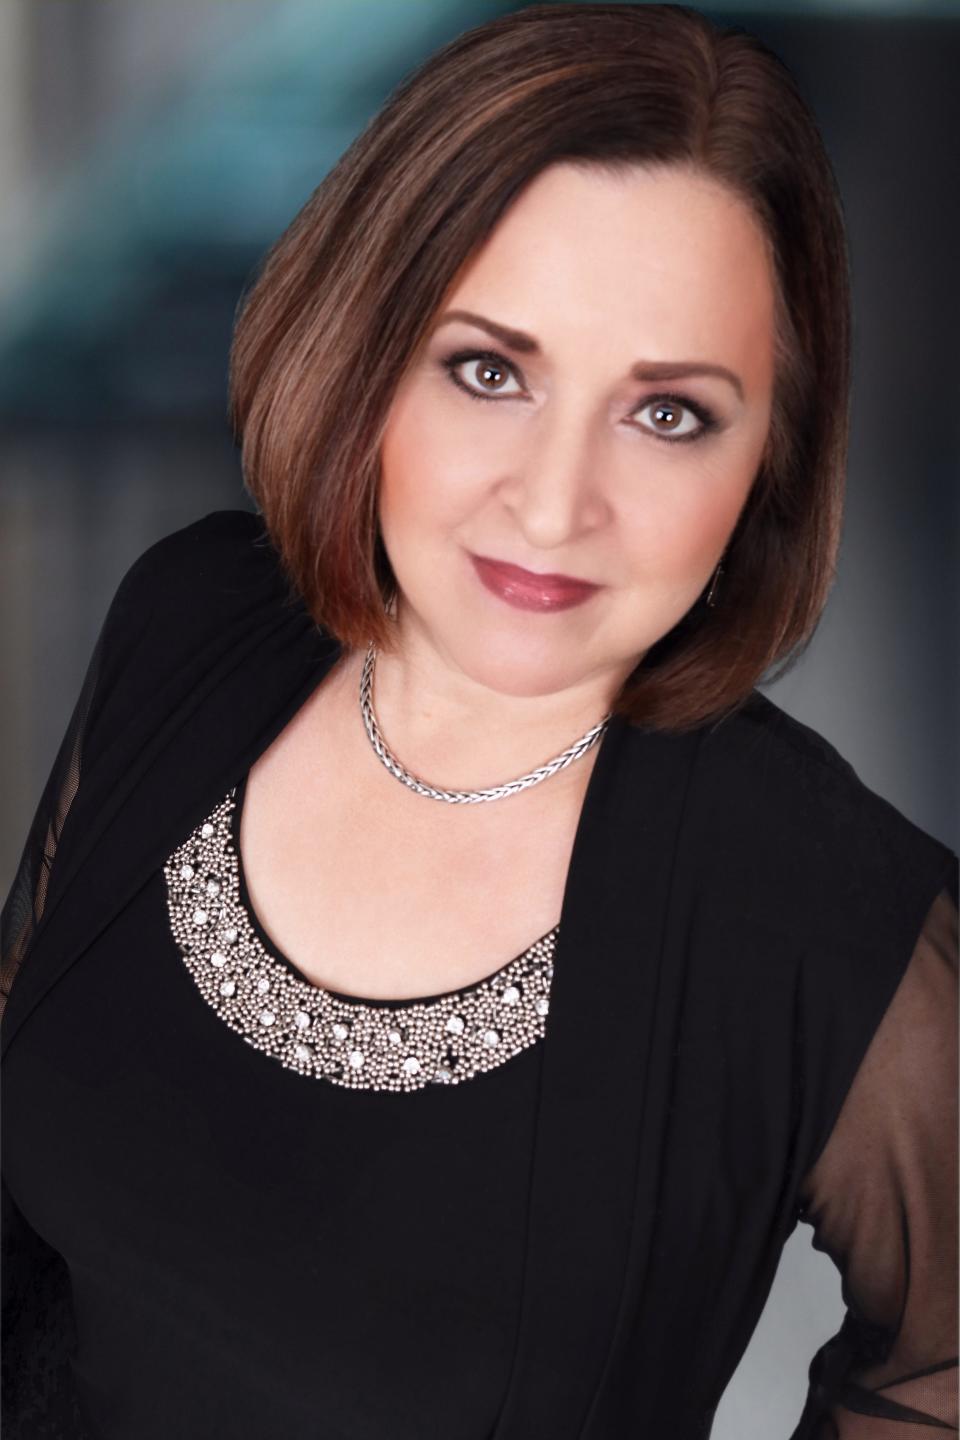 Pianist Suzanne Newcomb will be the featured soloist for the Metropolitan Chamber Orchestra's "Raise the Flag" concert at Ascension Lutheran Church on Sunday.